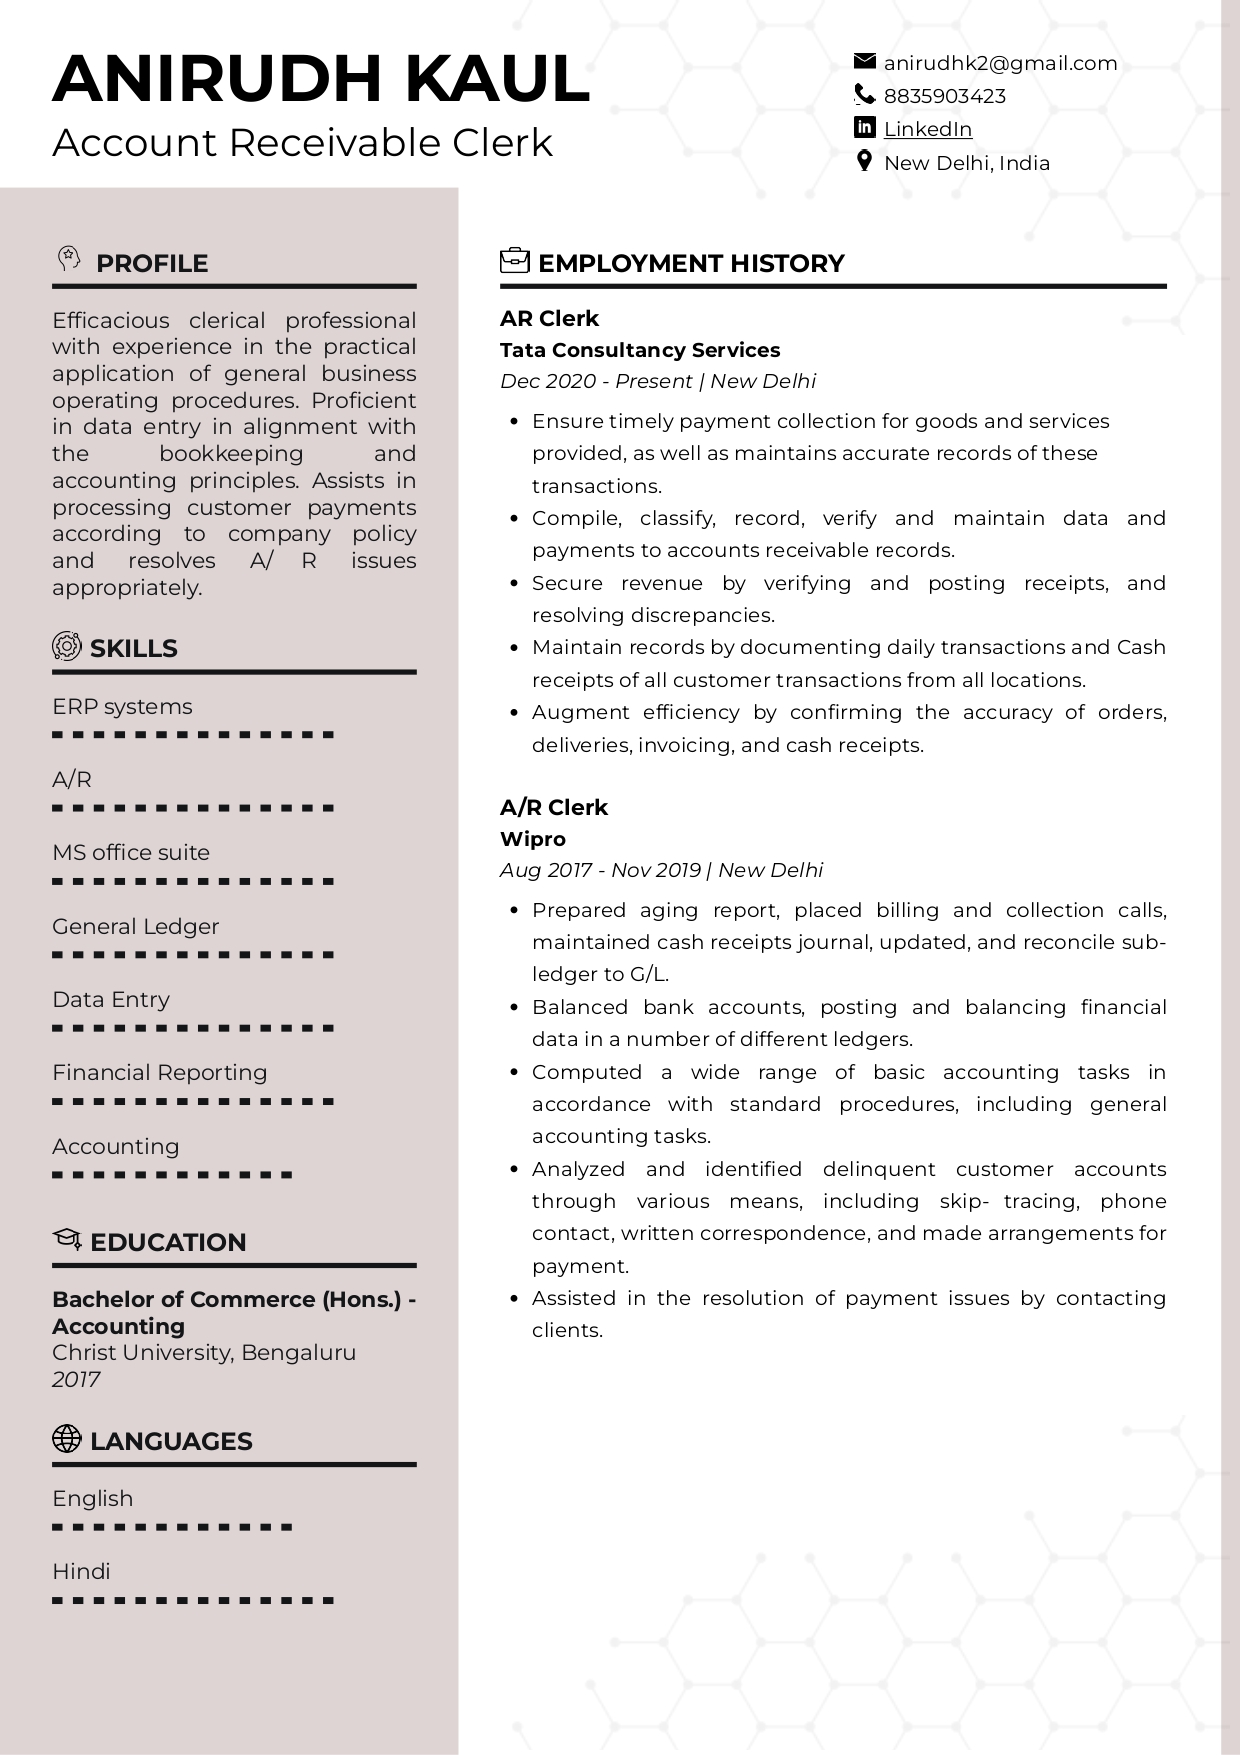 Sample Resume of A/R (Accounts Receivable) Clerk | Free Resume Templates & Samples on Resumod.co